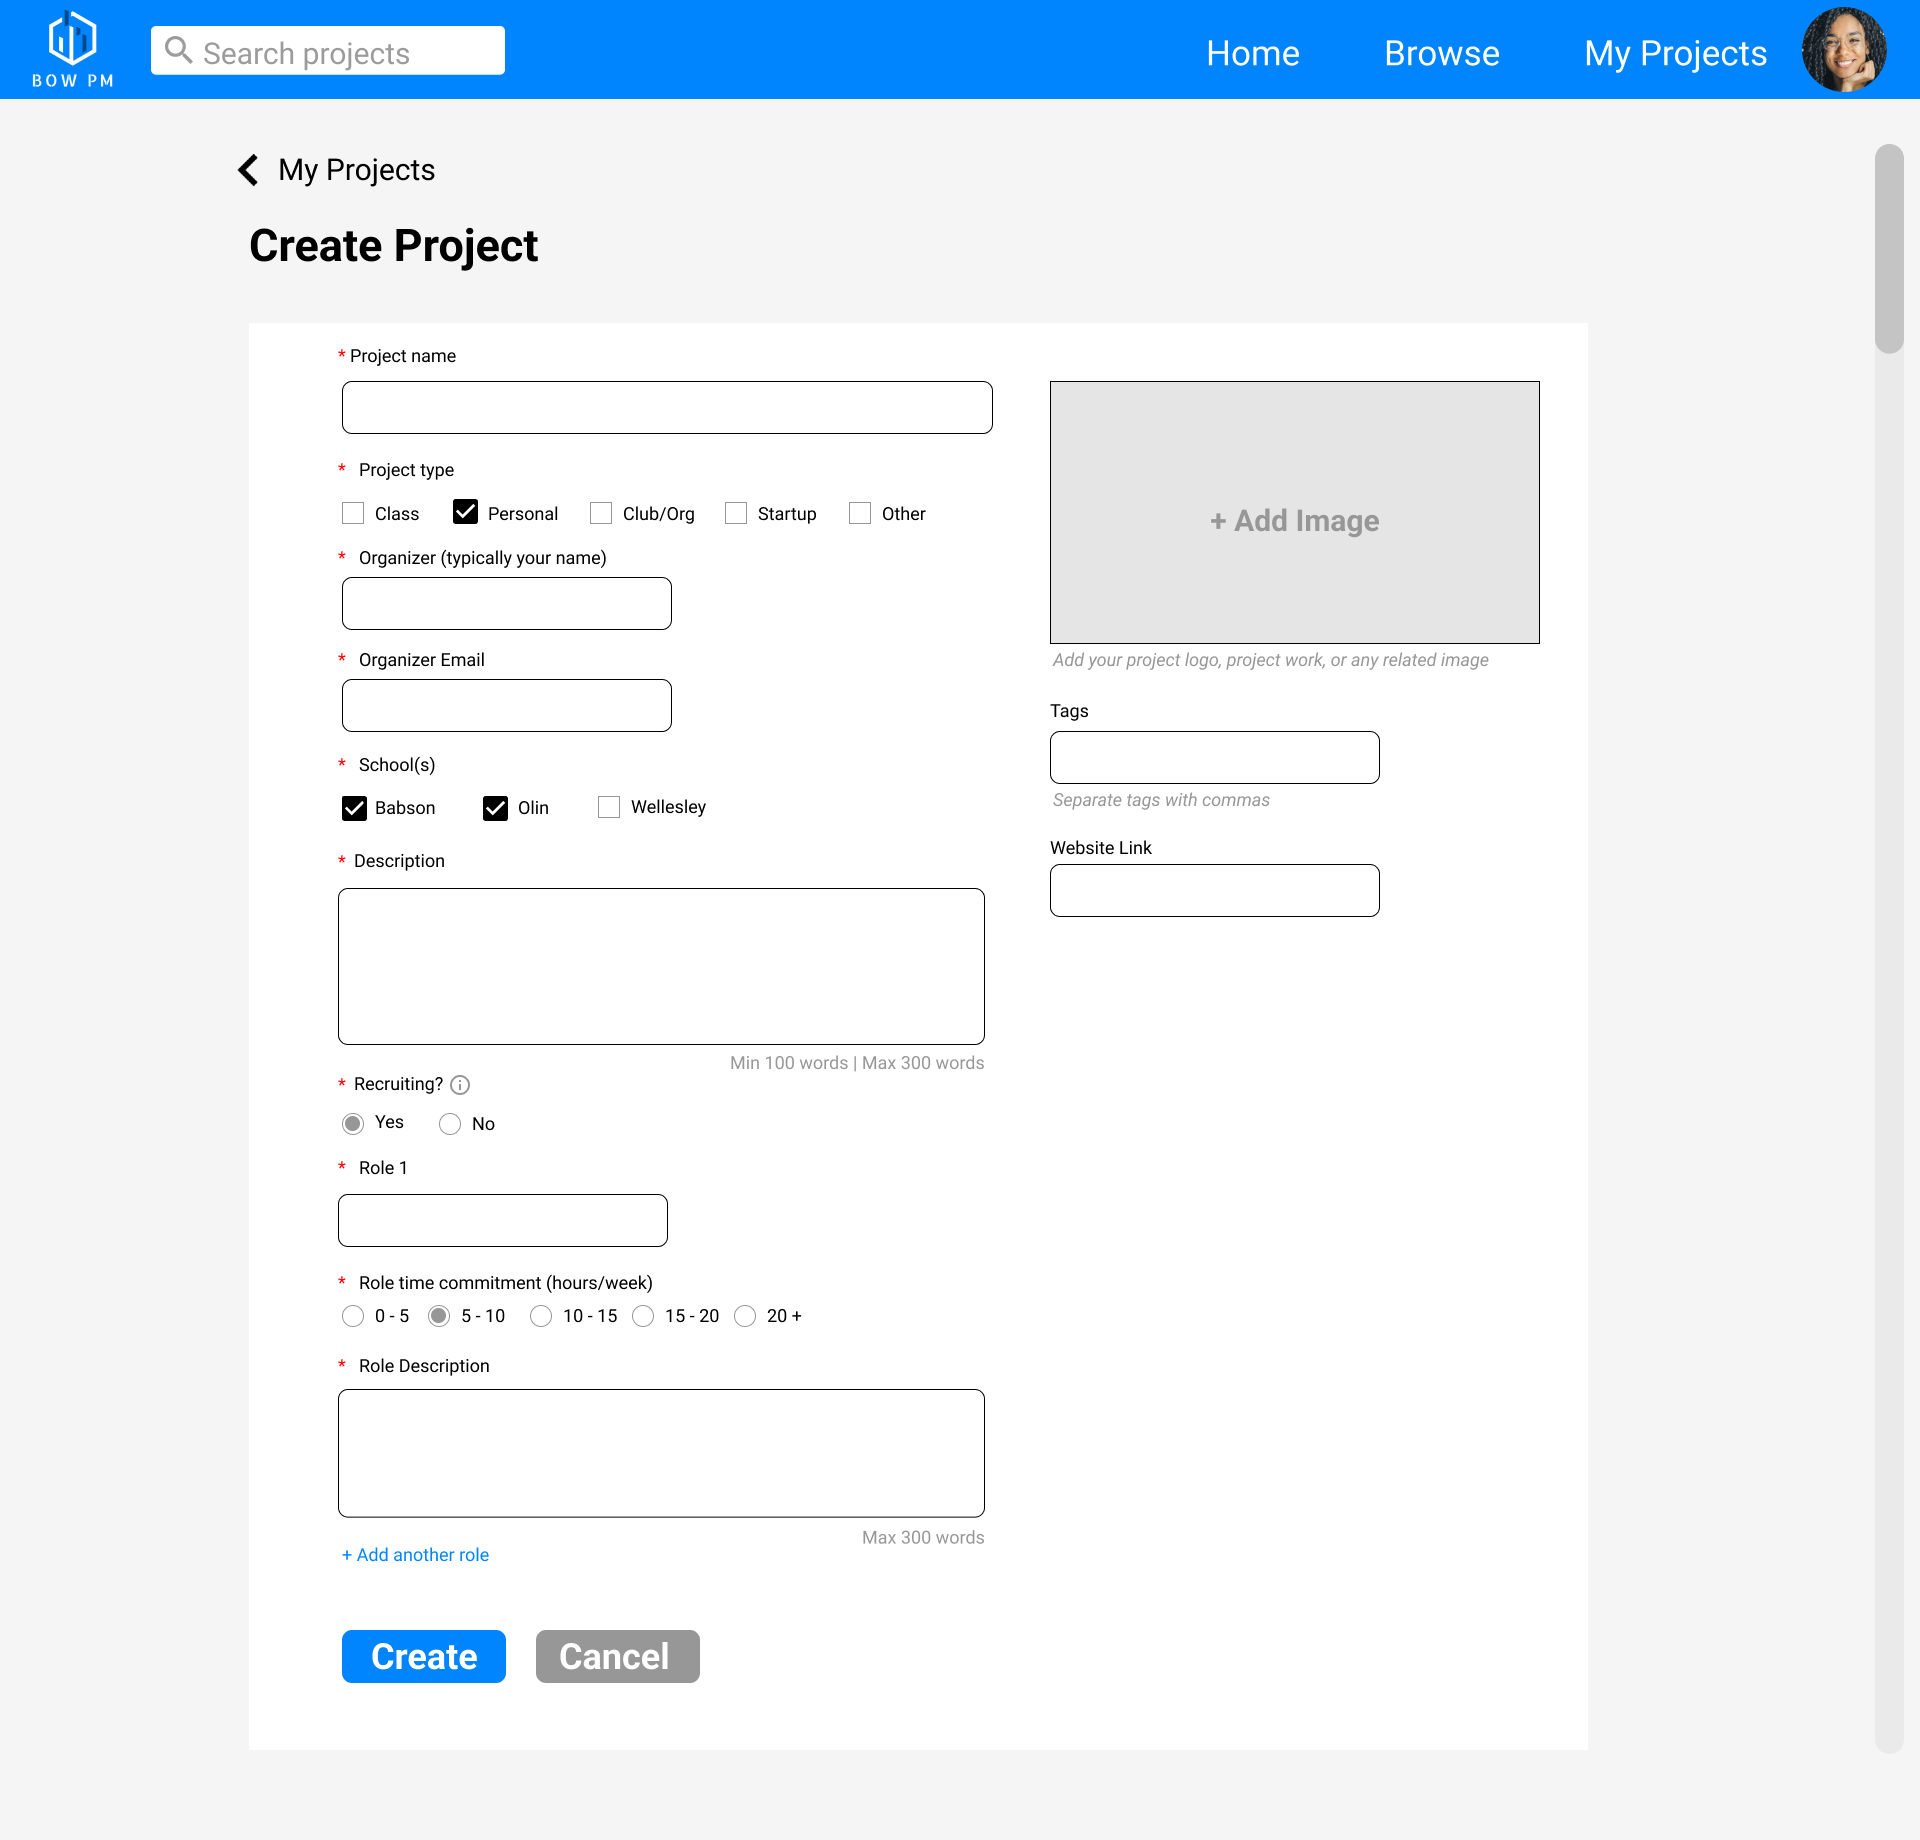 Screen grab of the create project page Figma mockup